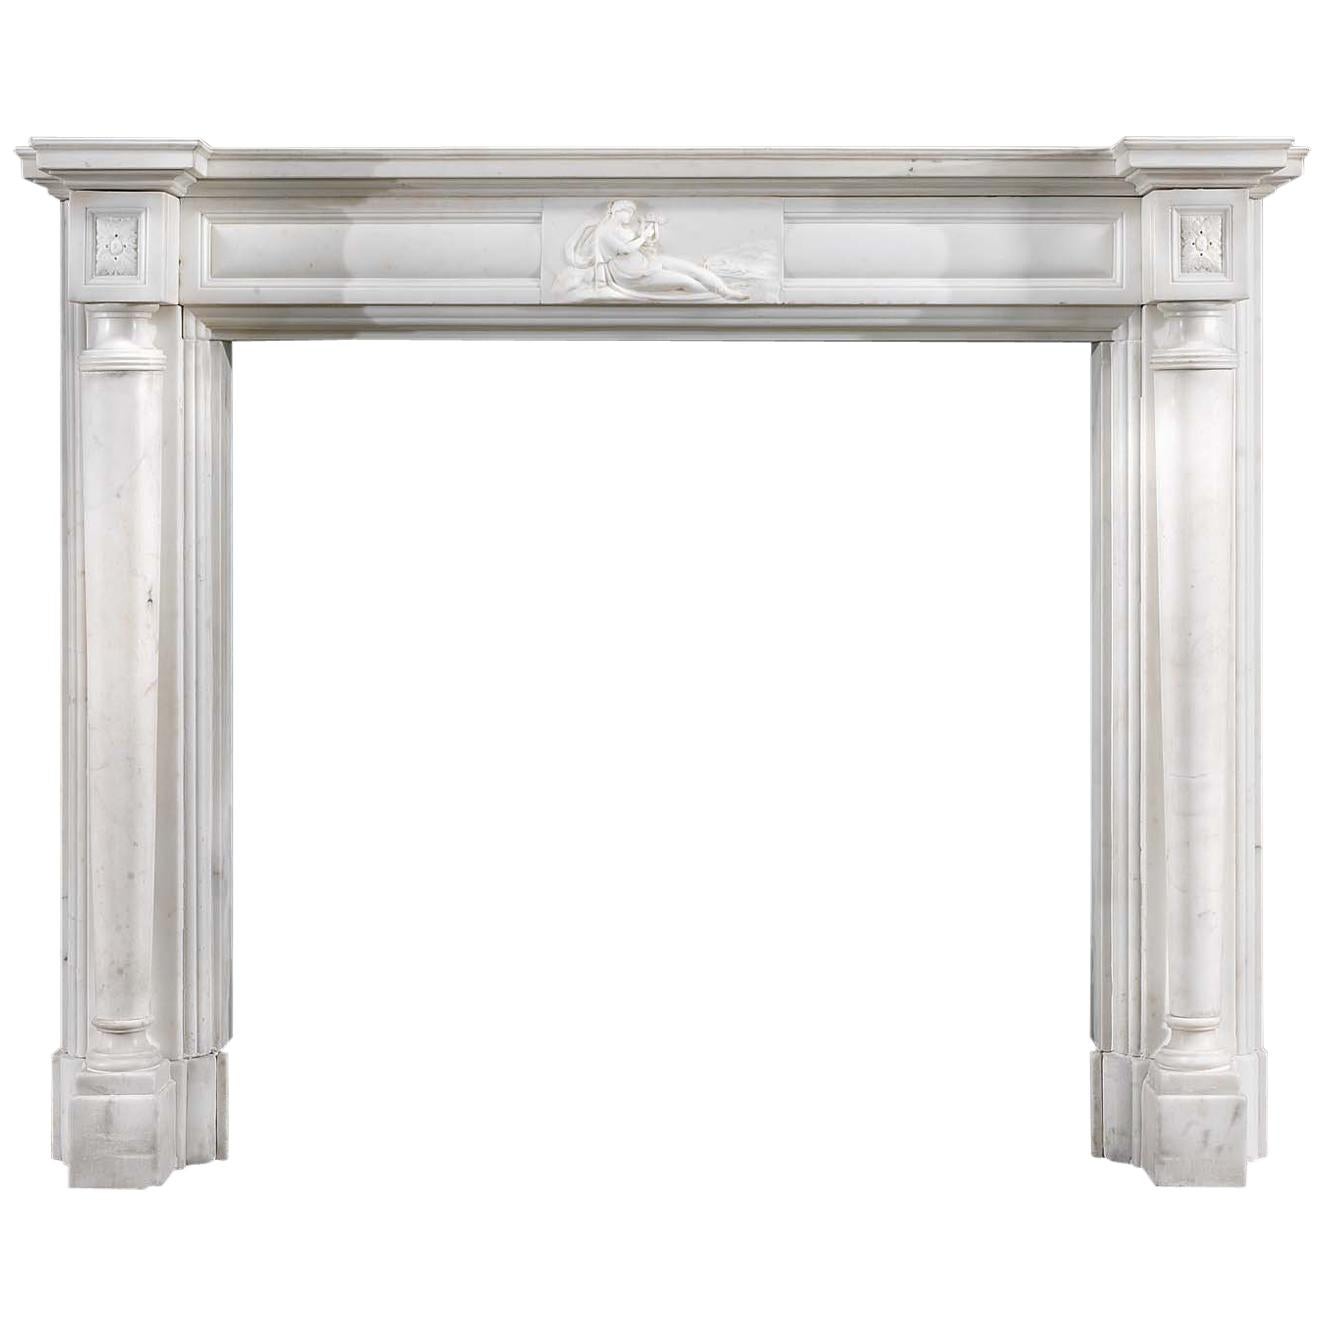 White Statuary Marble Columned Regency Antique Chimneypiece For Sale